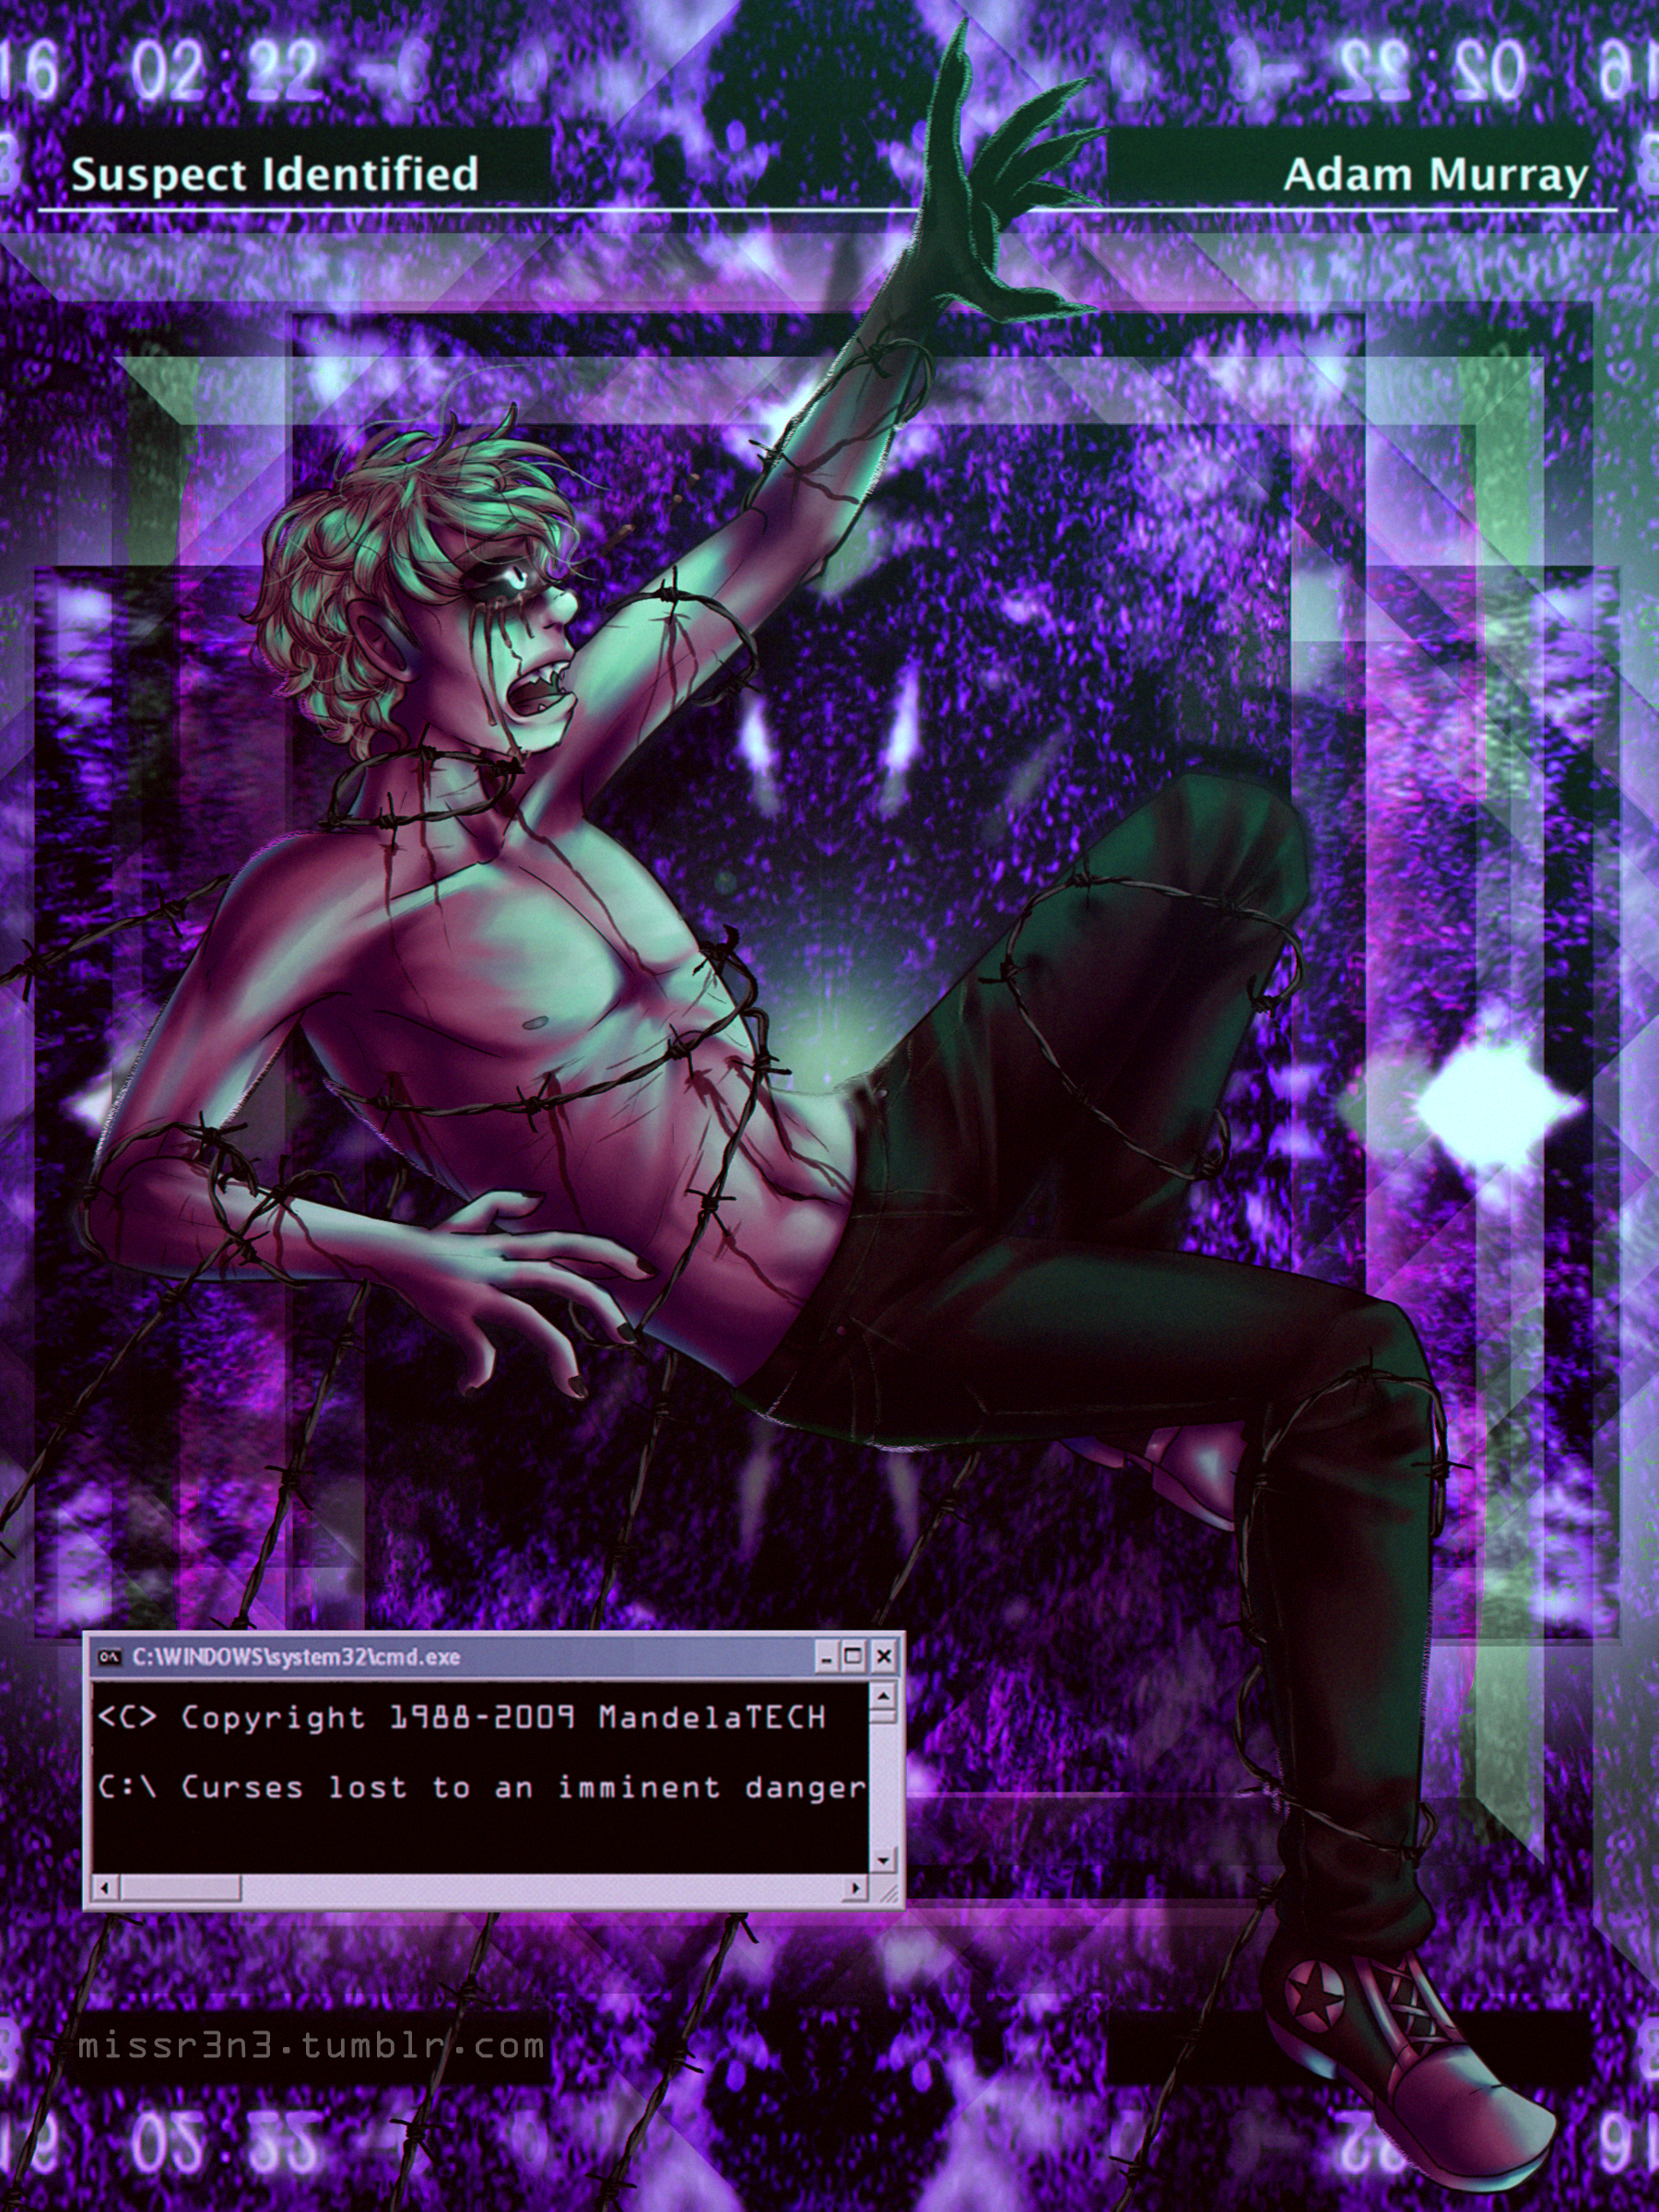 adam, as he appears in mandela catalyst, is dragged downward by barbed wire, leaving bleeding scratches all over his torso. The background is a heavily photoshopped, fractal-like version of the final jumpscare in mandela catalyst. Text above adam reads 'suspect identified: adam murray'. a windows 95 style pop-up is in the lower left corner of the image, and it reads 'Copyright Mandela Tech 1988-2009. Curses lost to an imminent danger.